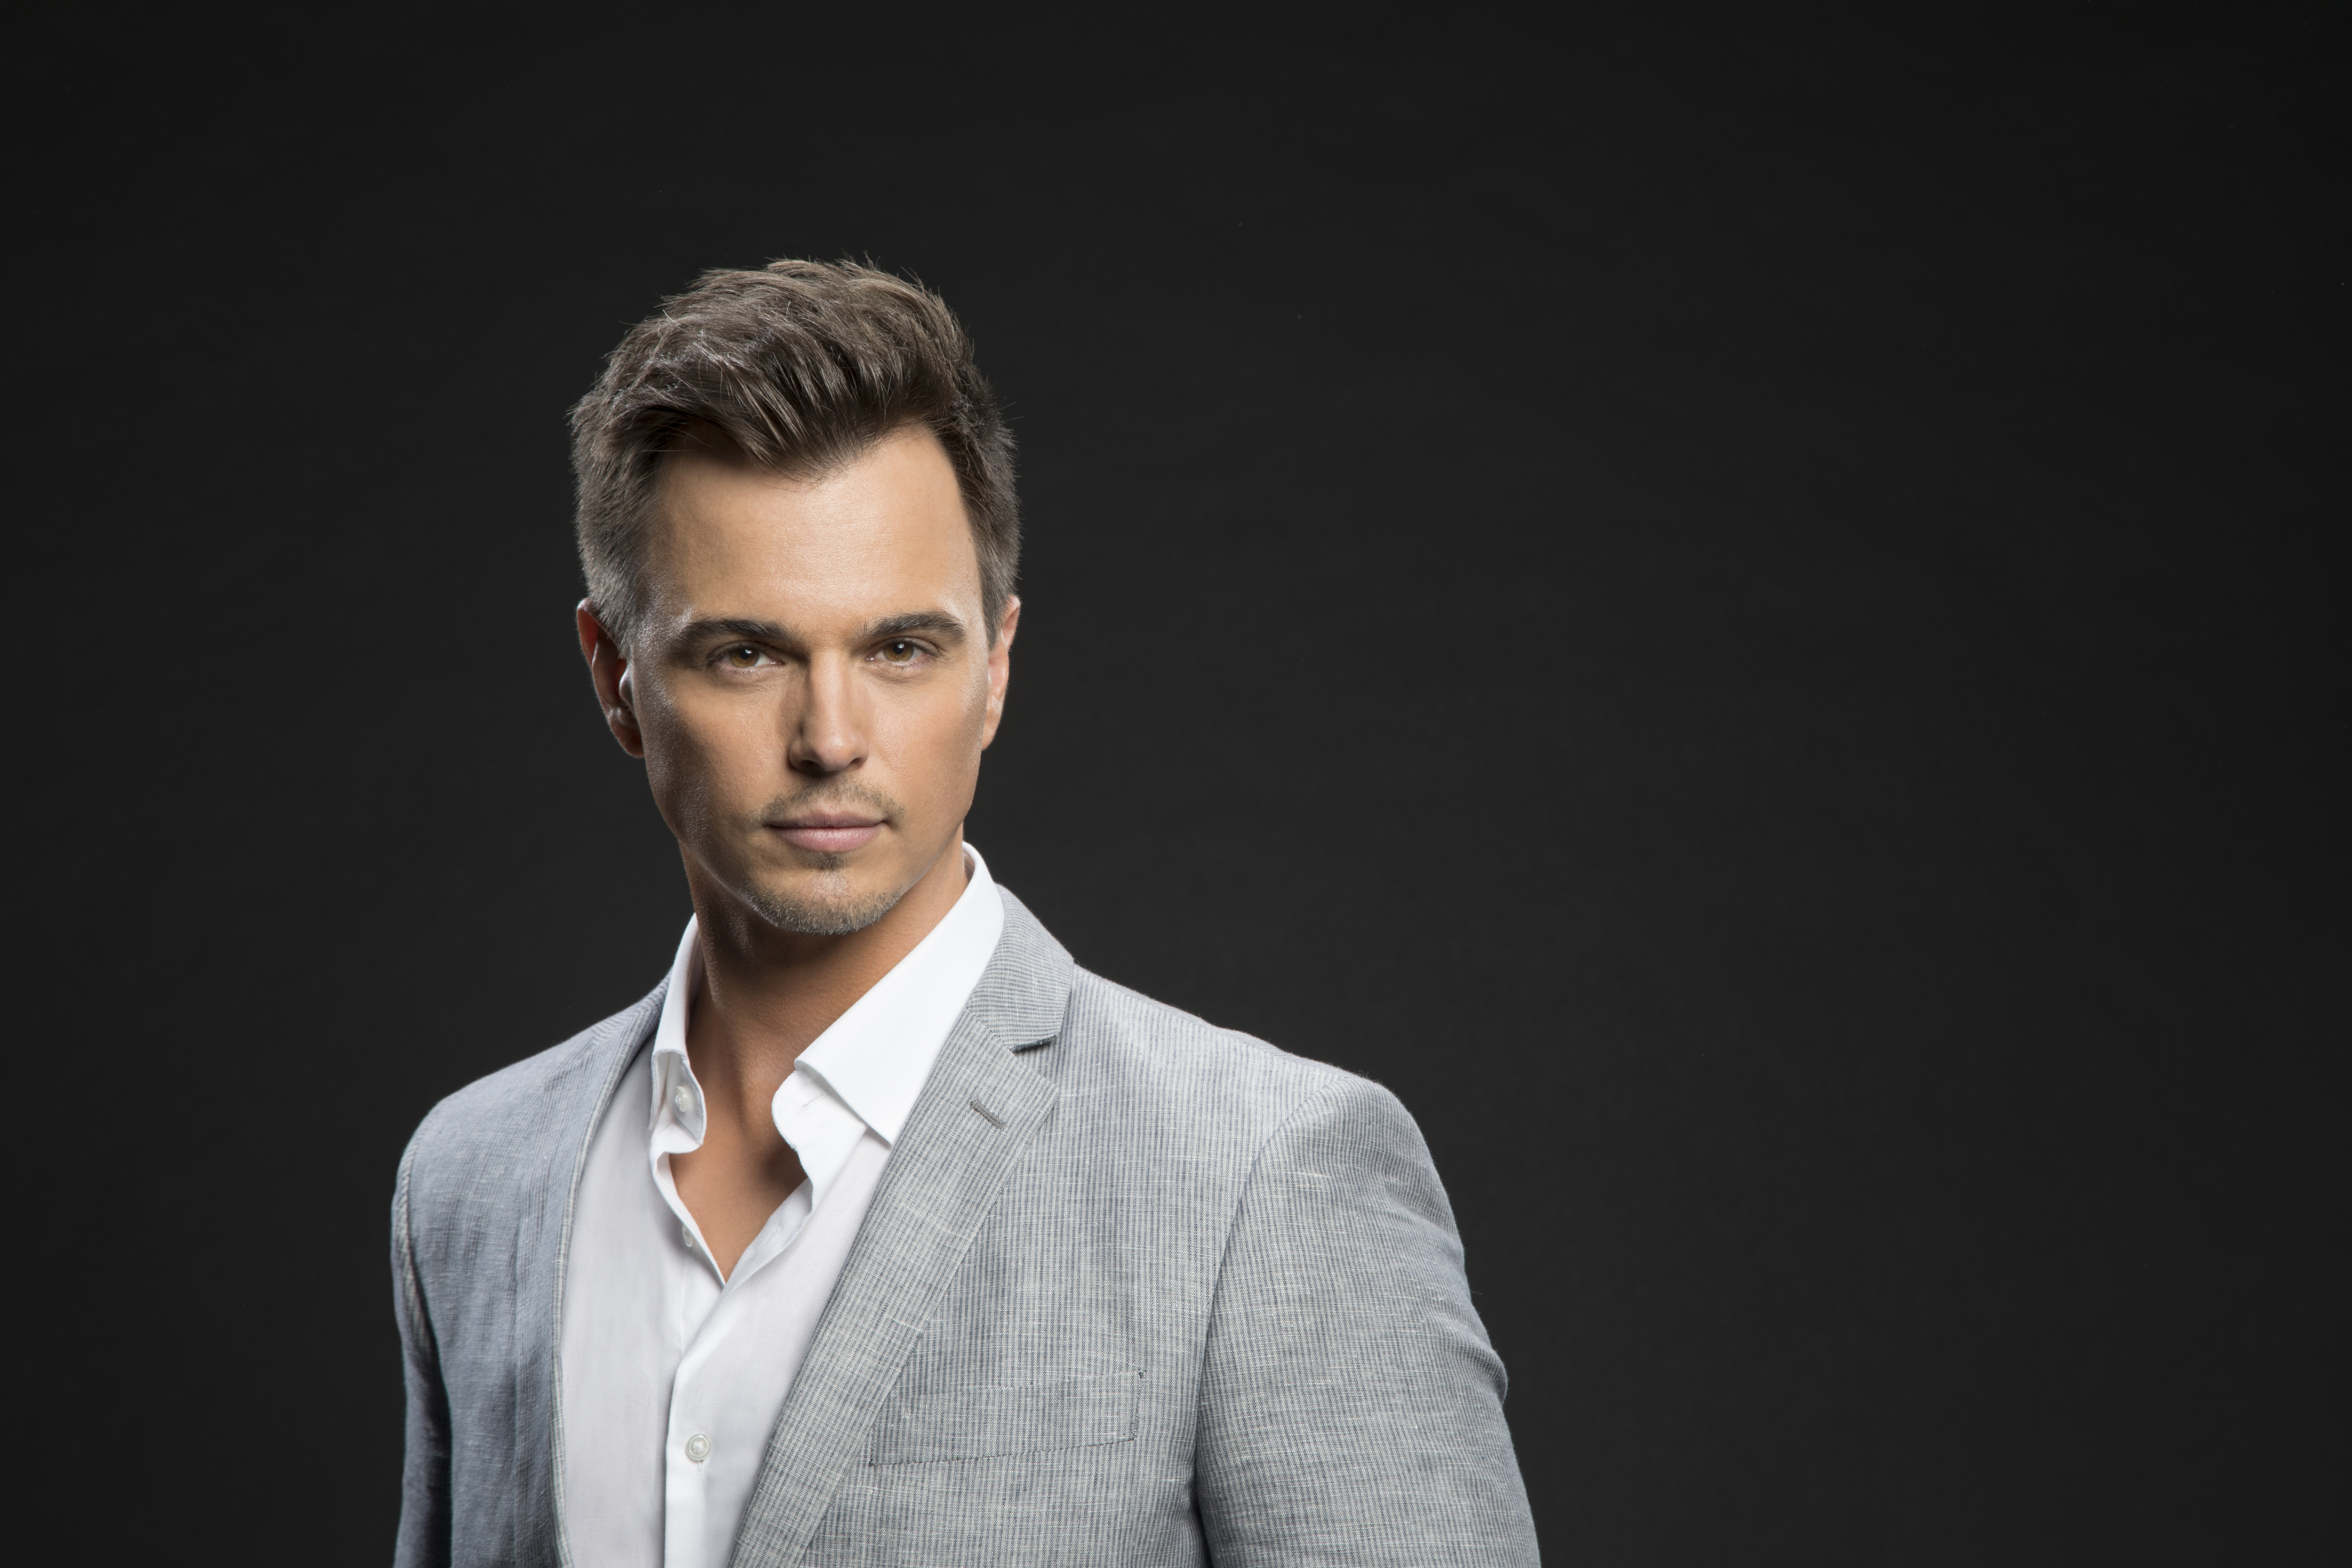 'The Bold and the Beautiful' actor Darin Brooks wearing a grey suit and white shirt standing in front of a black backdrop.